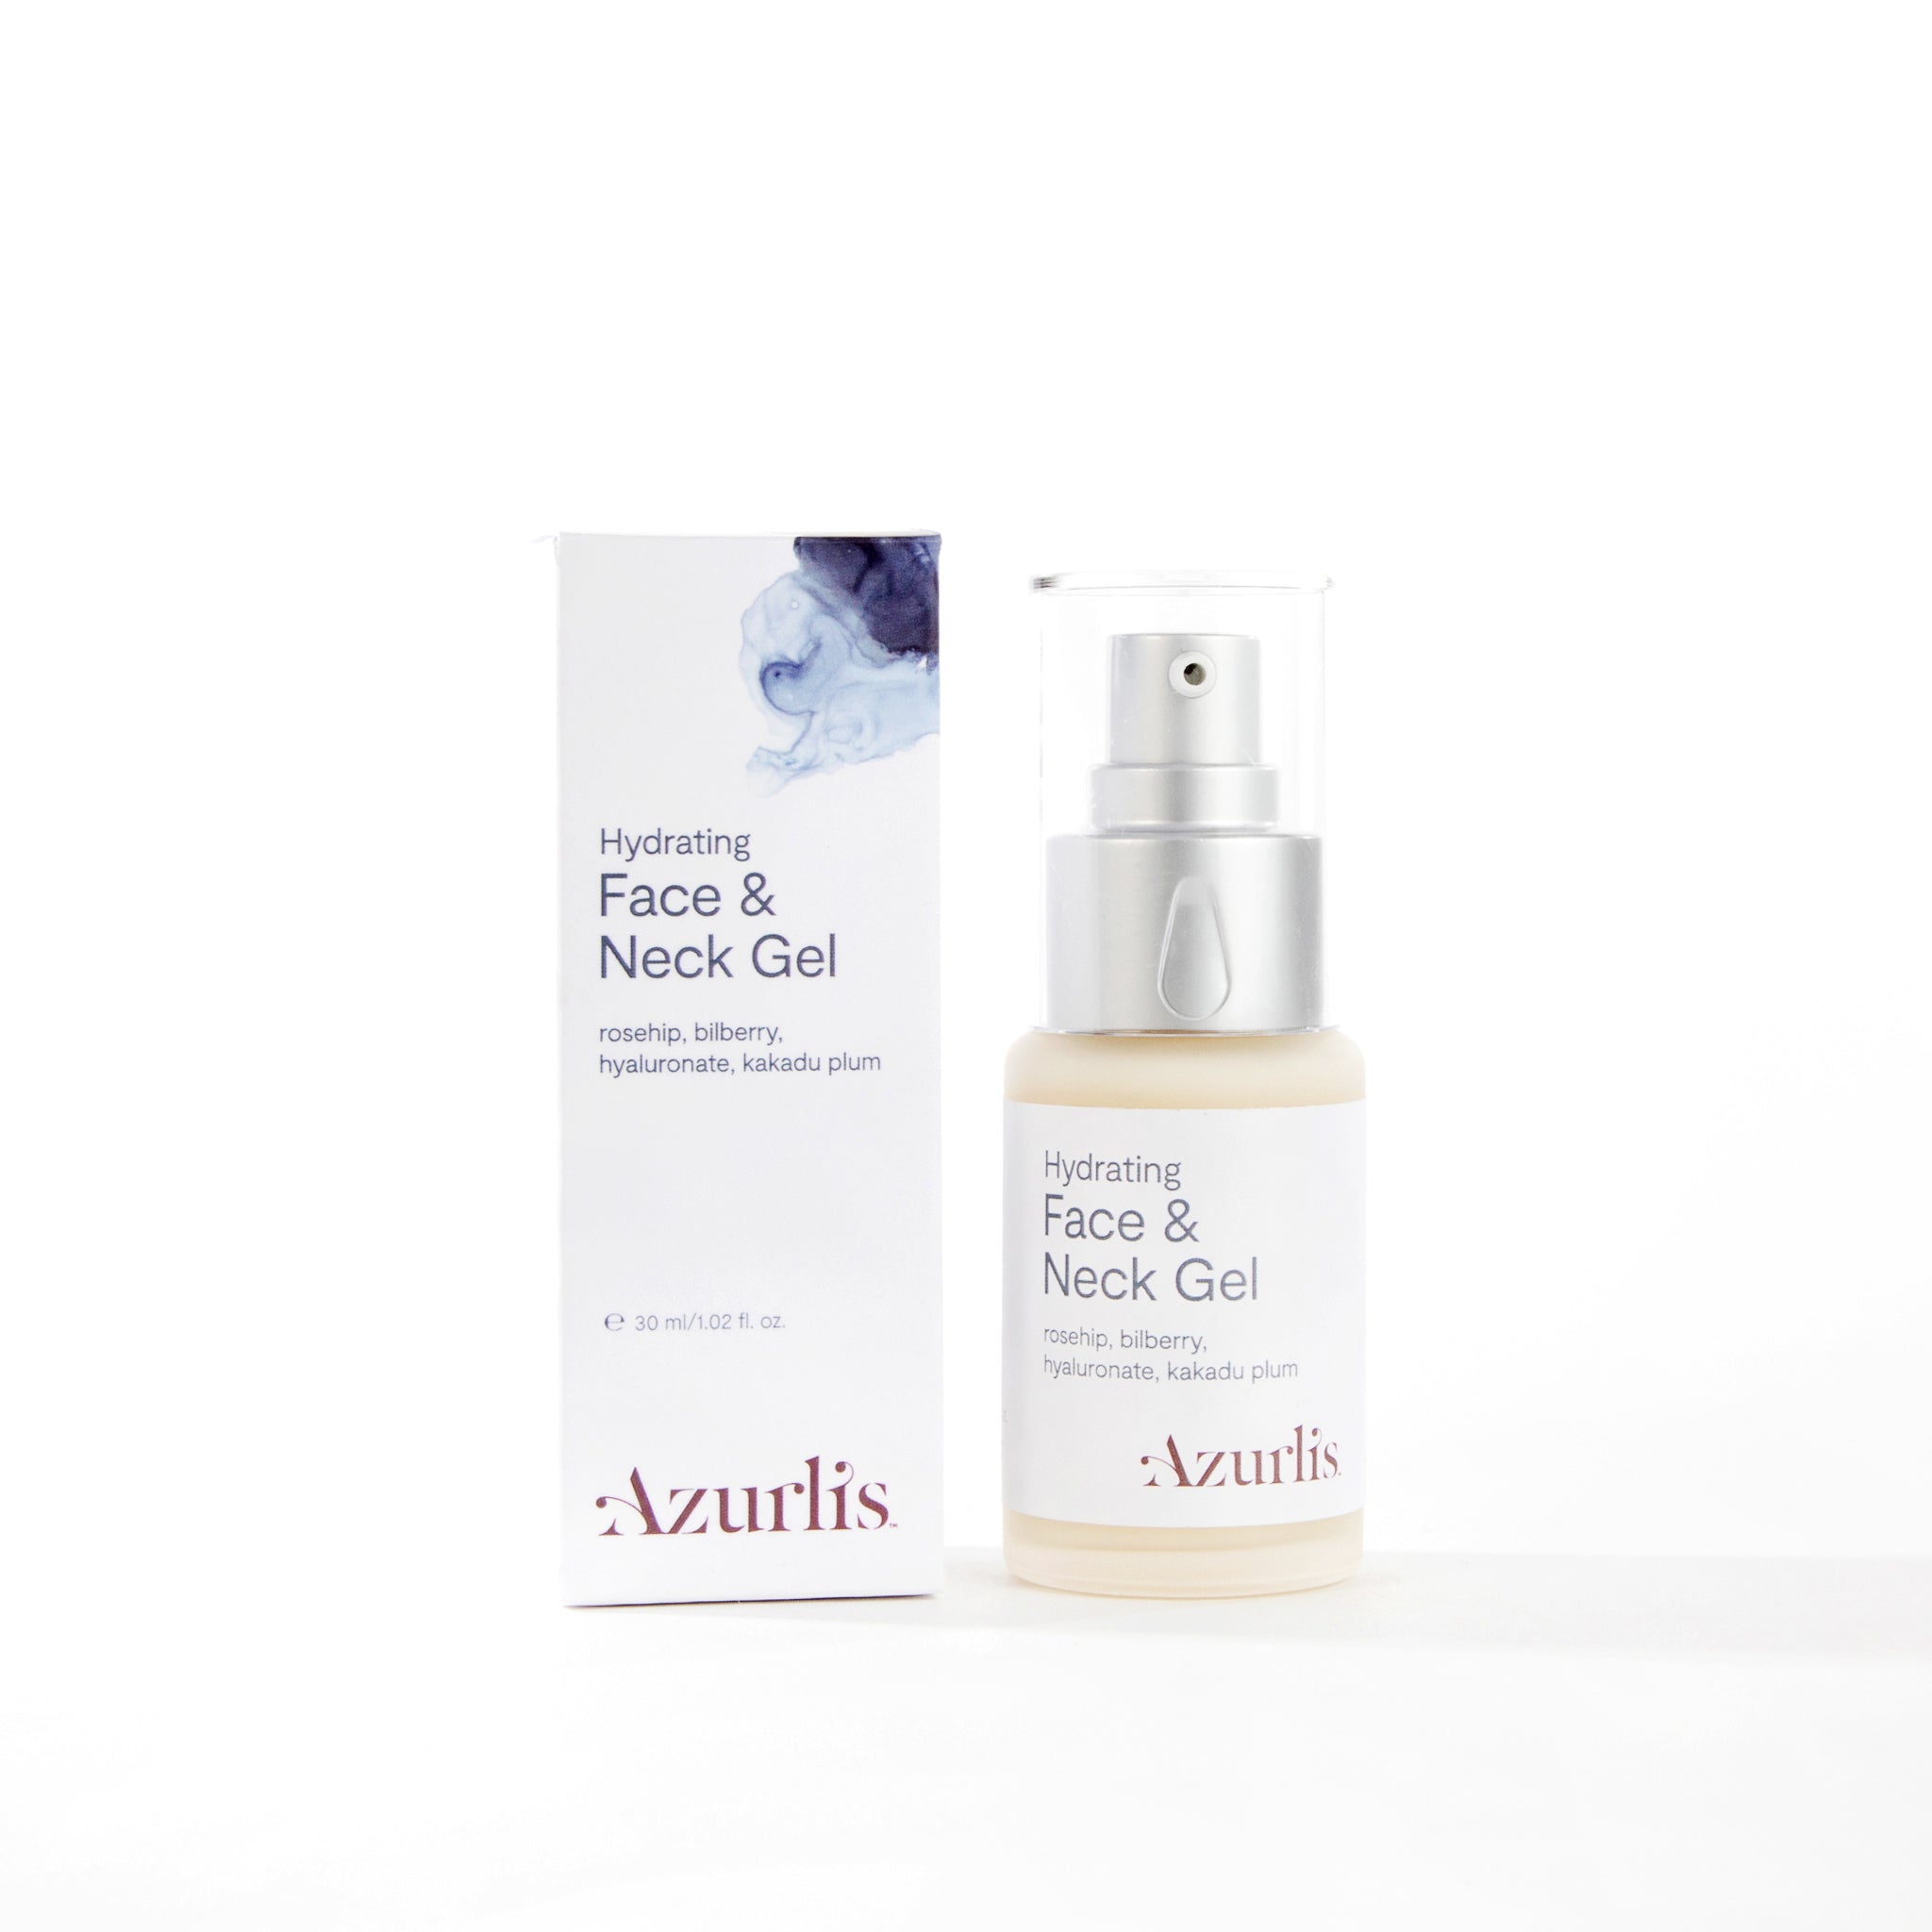 Azurlis™ Hydrating Face &amp; Neck Gel - Serum 30ml is a real nourishing hydrating gel, cream, serum star product, superb for all skin types, to protect against premature ageing!